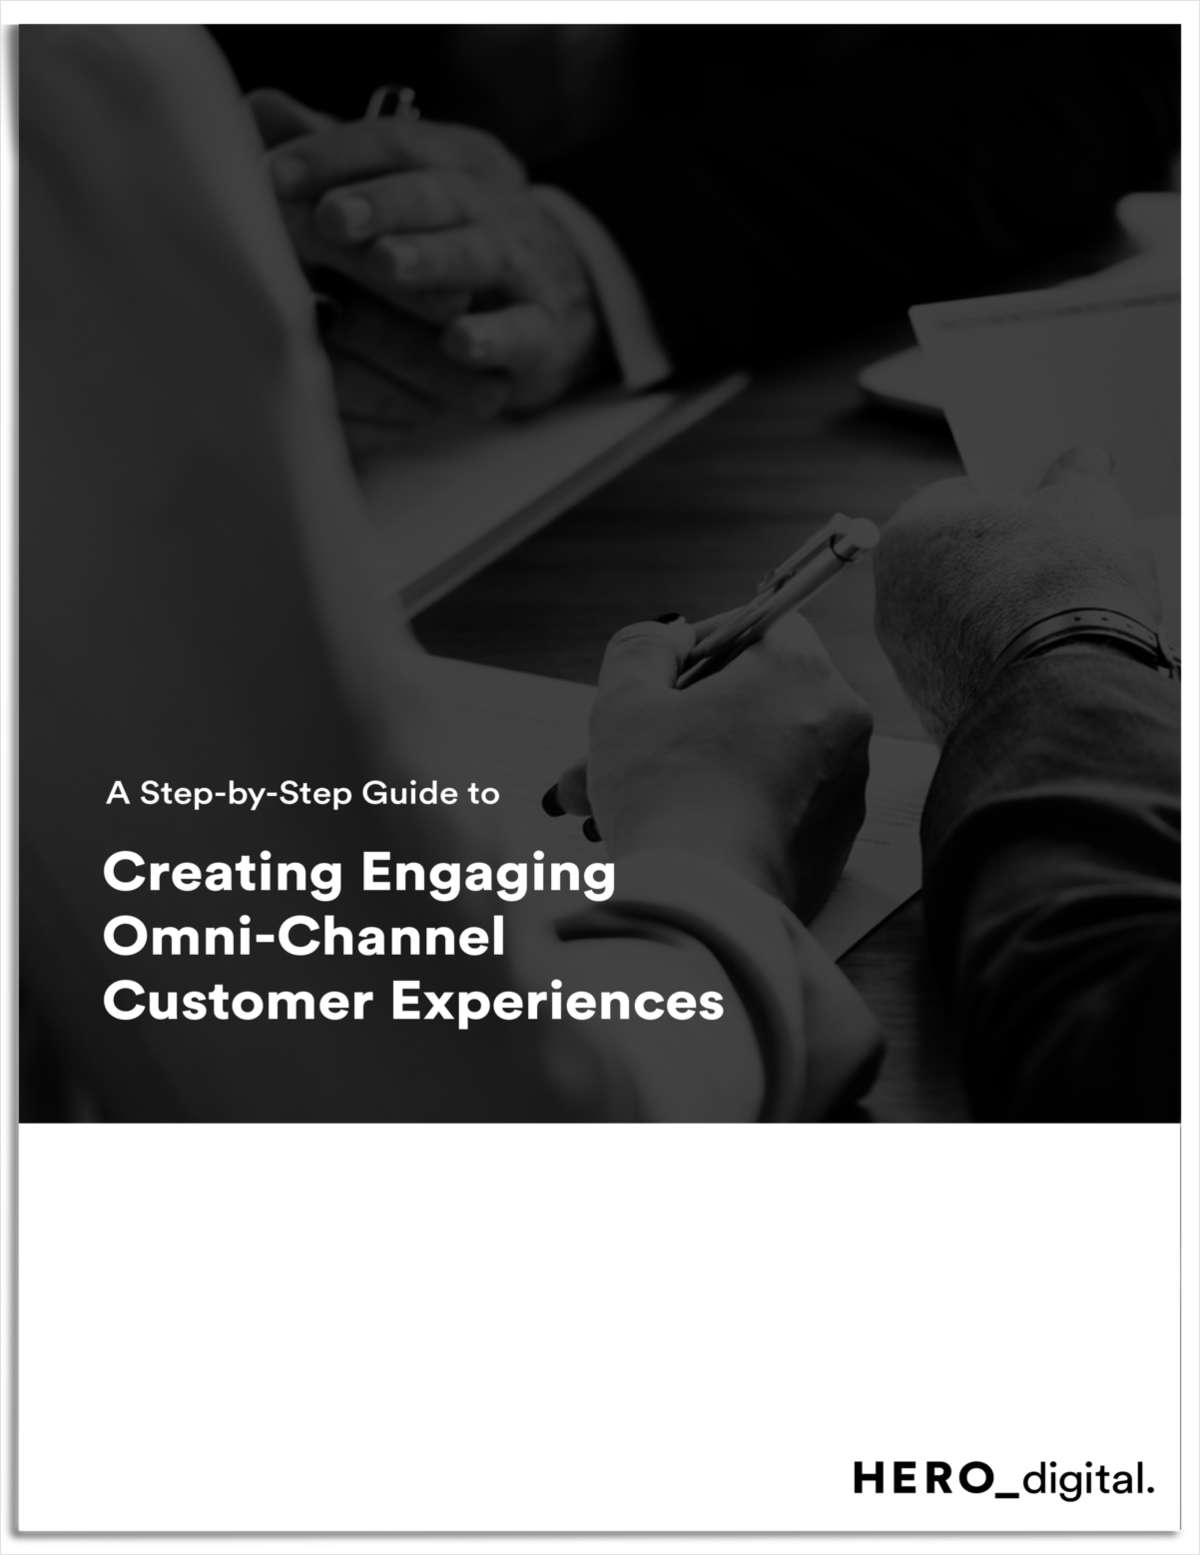 The Step-by-Step Guide to Creating Engaging Omni-Channel Customer Experiences